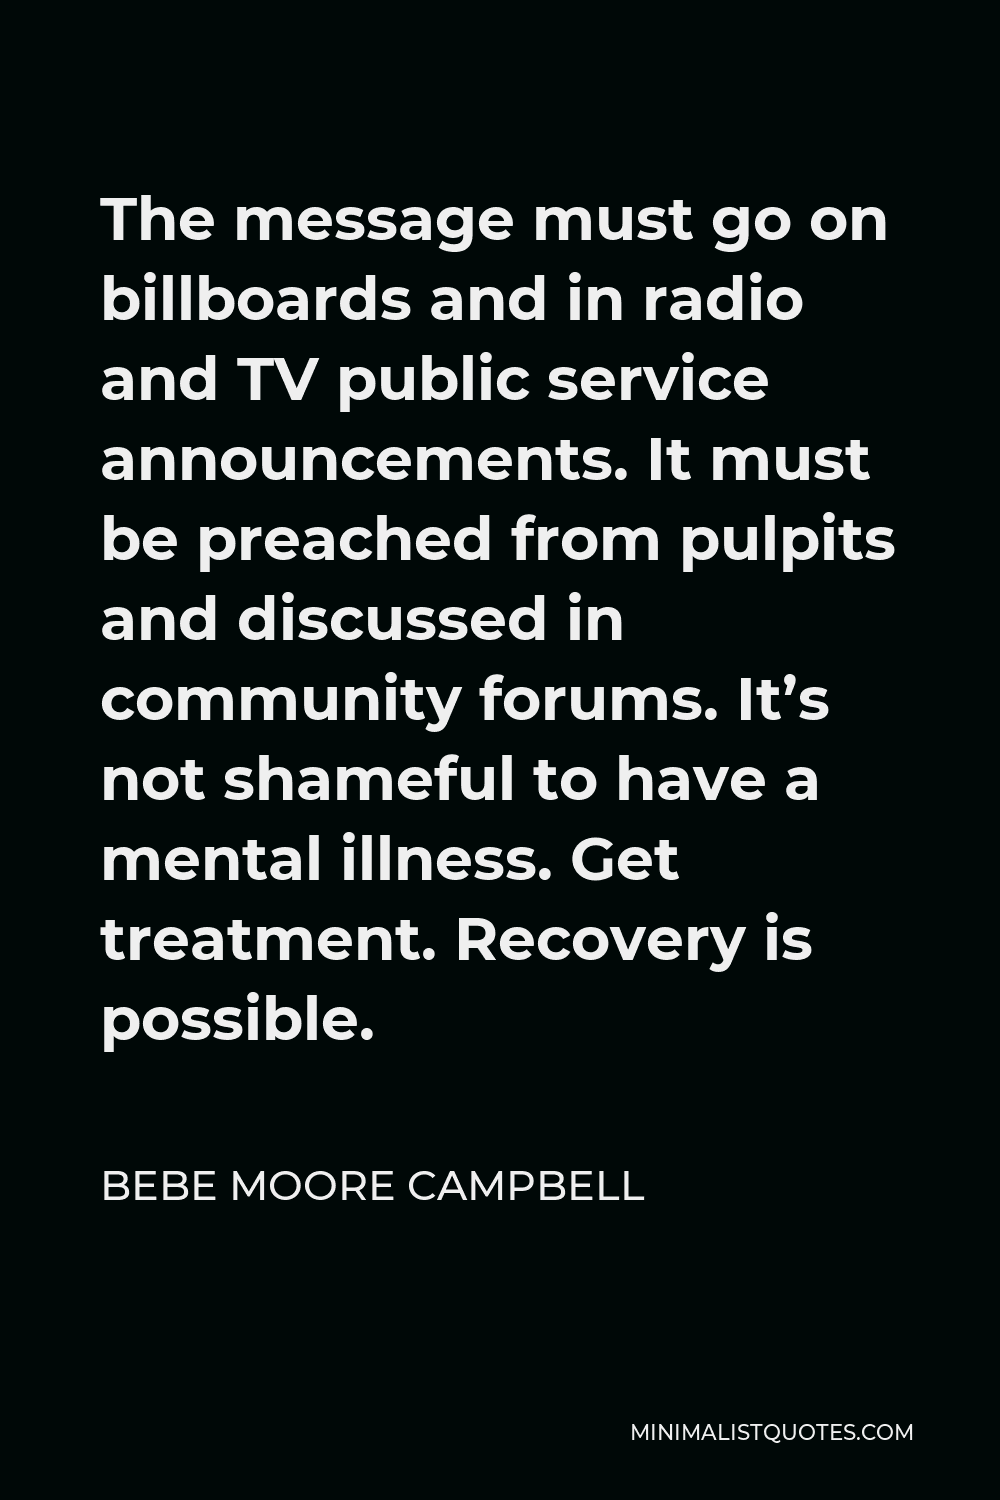 Bebe Moore Campbell Quote - The message must go on billboards and in radio and TV public service announcements. It must be preached from pulpits and discussed in community forums. It’s not shameful to have a mental illness. Get treatment. Recovery is possible.